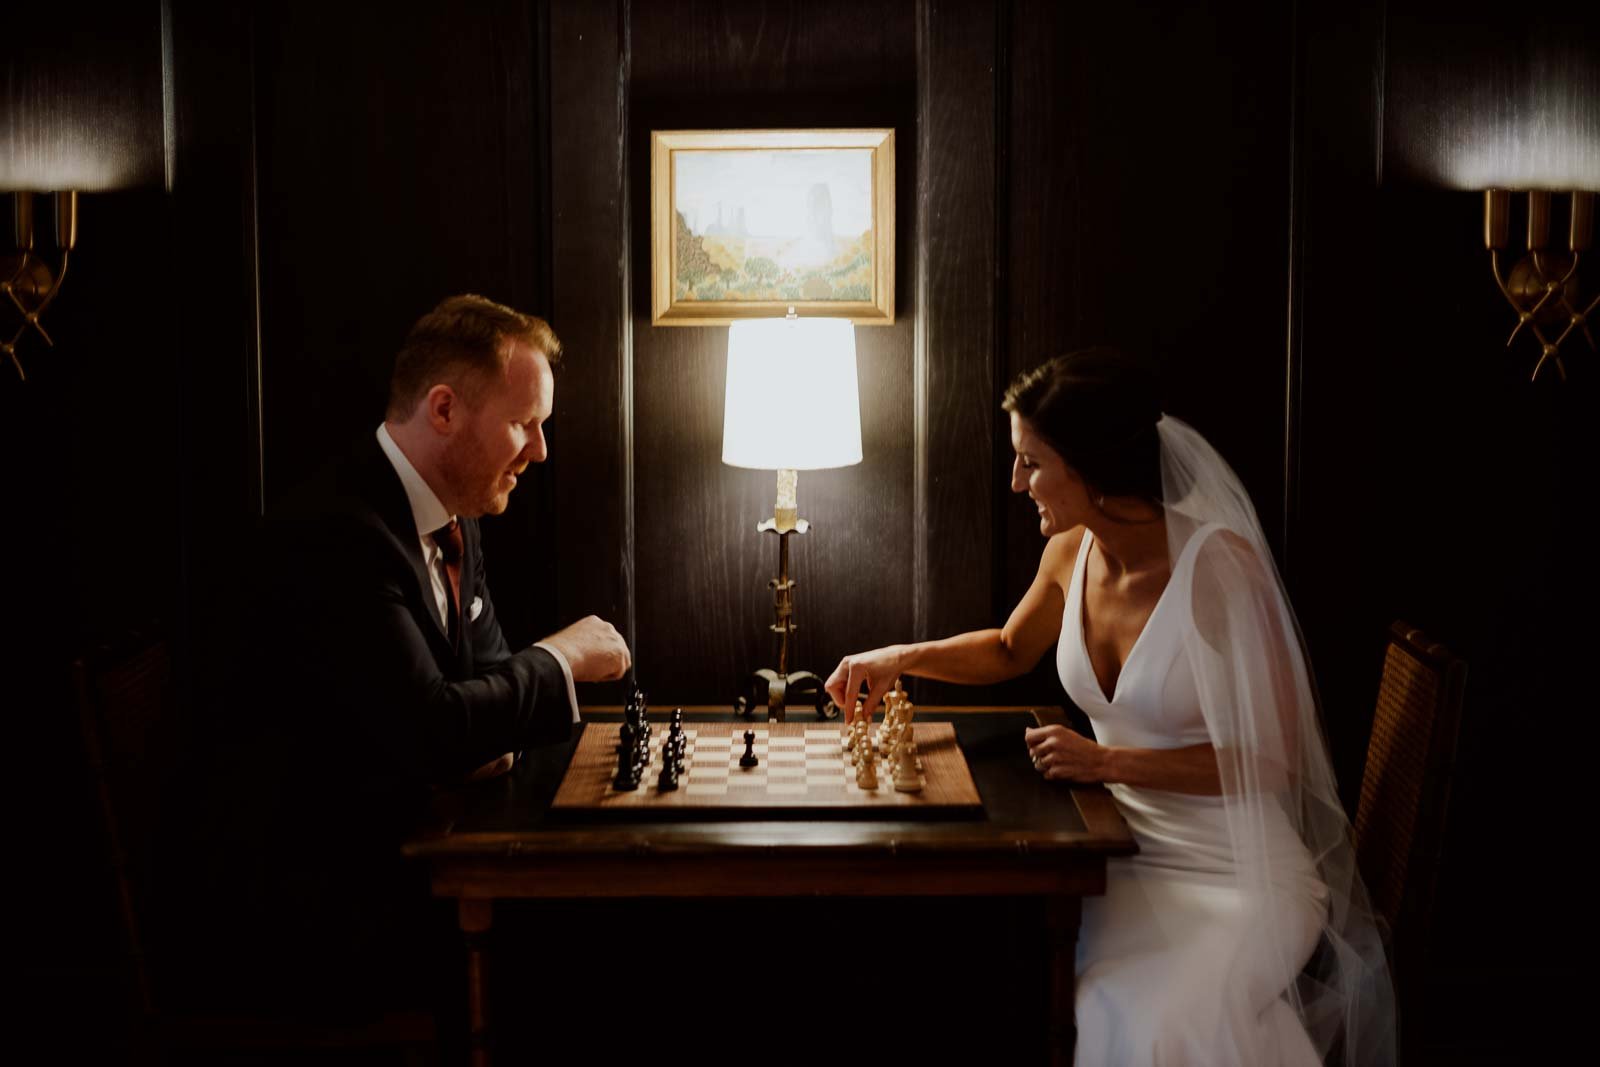 A couple play a round of chess during their wedding reception at Commodore Perry Estate, Auberge Resorts Collection, Austin, Texas.